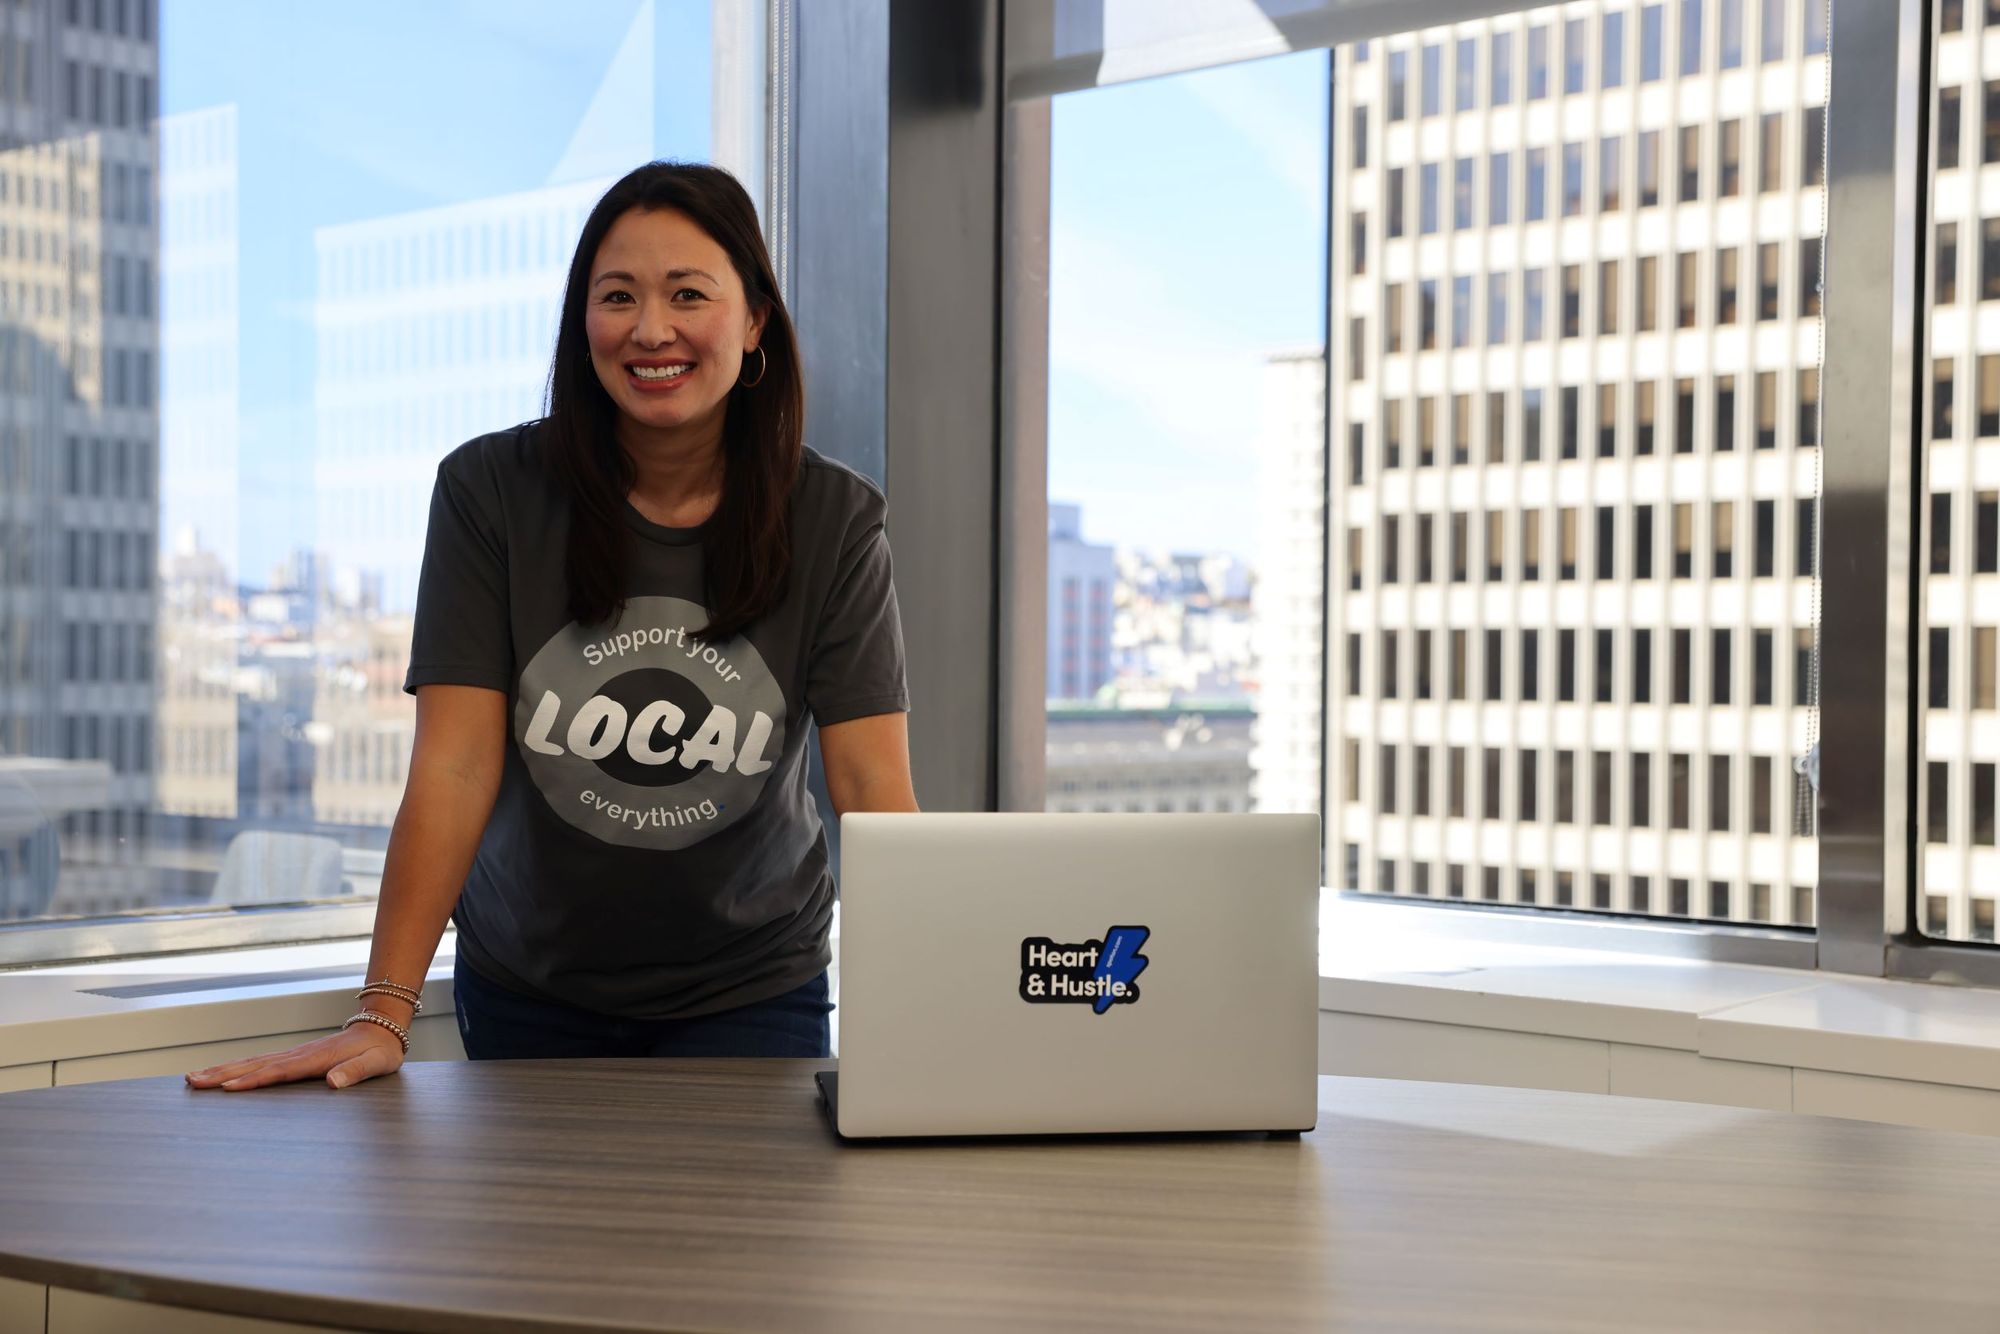 Michelle Zmugg, General Counsel of SpotOn, working in San Francisco, California.